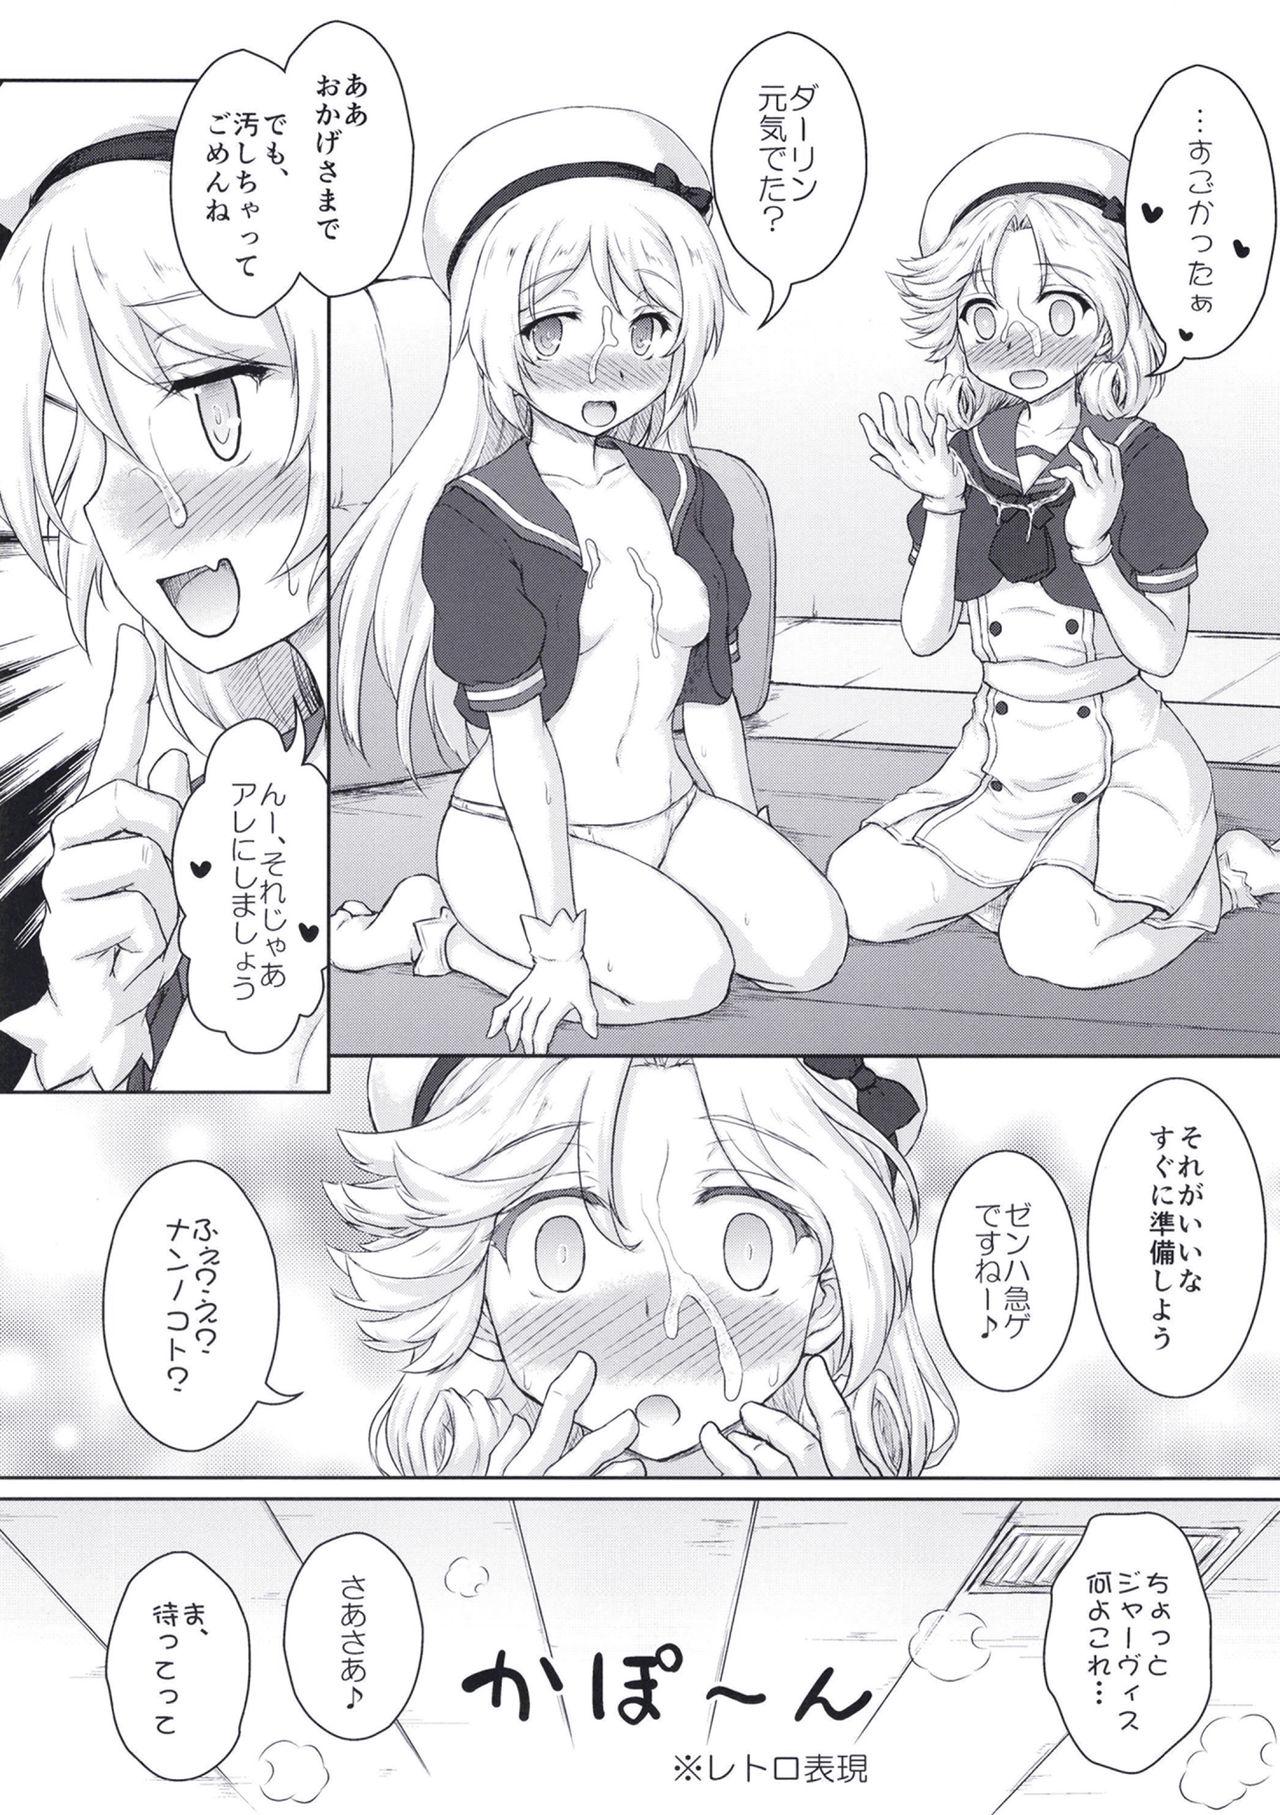 Bizarre Darling is in sight! act2 - Kantai collection Black Girl - Page 11